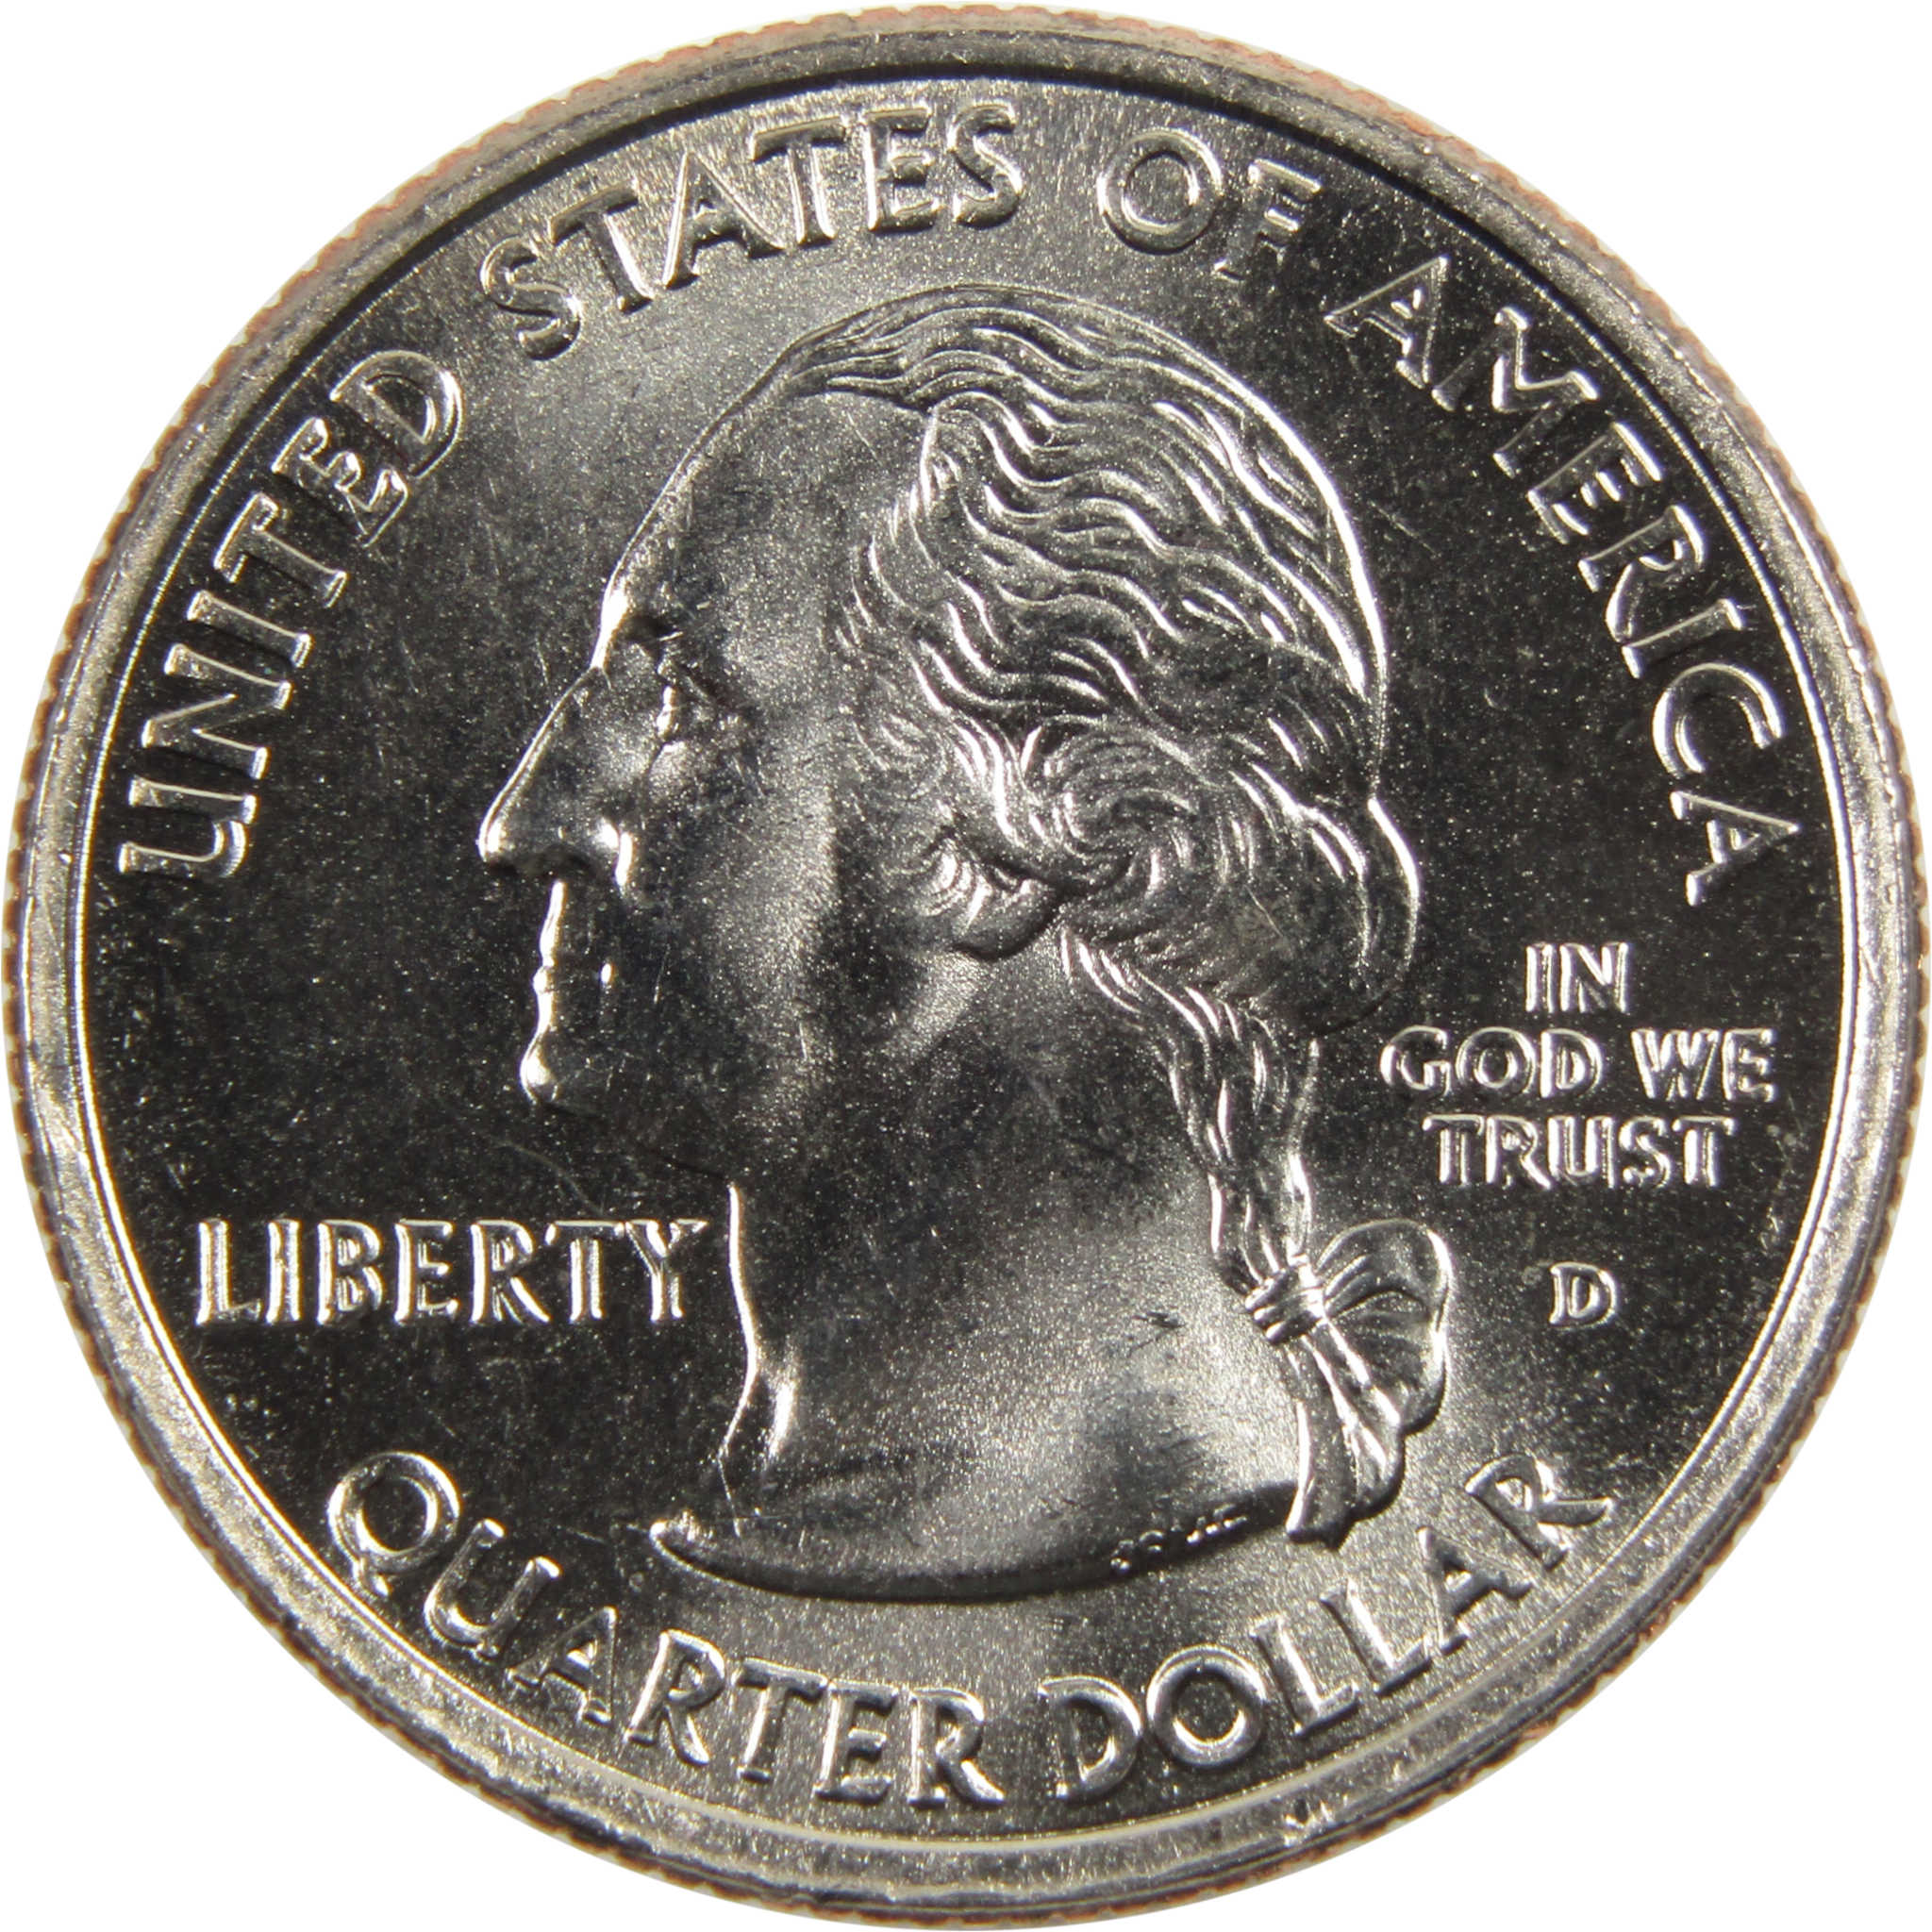 2002 D Tennessee State Quarter BU Uncirculated Clad 25c Coin